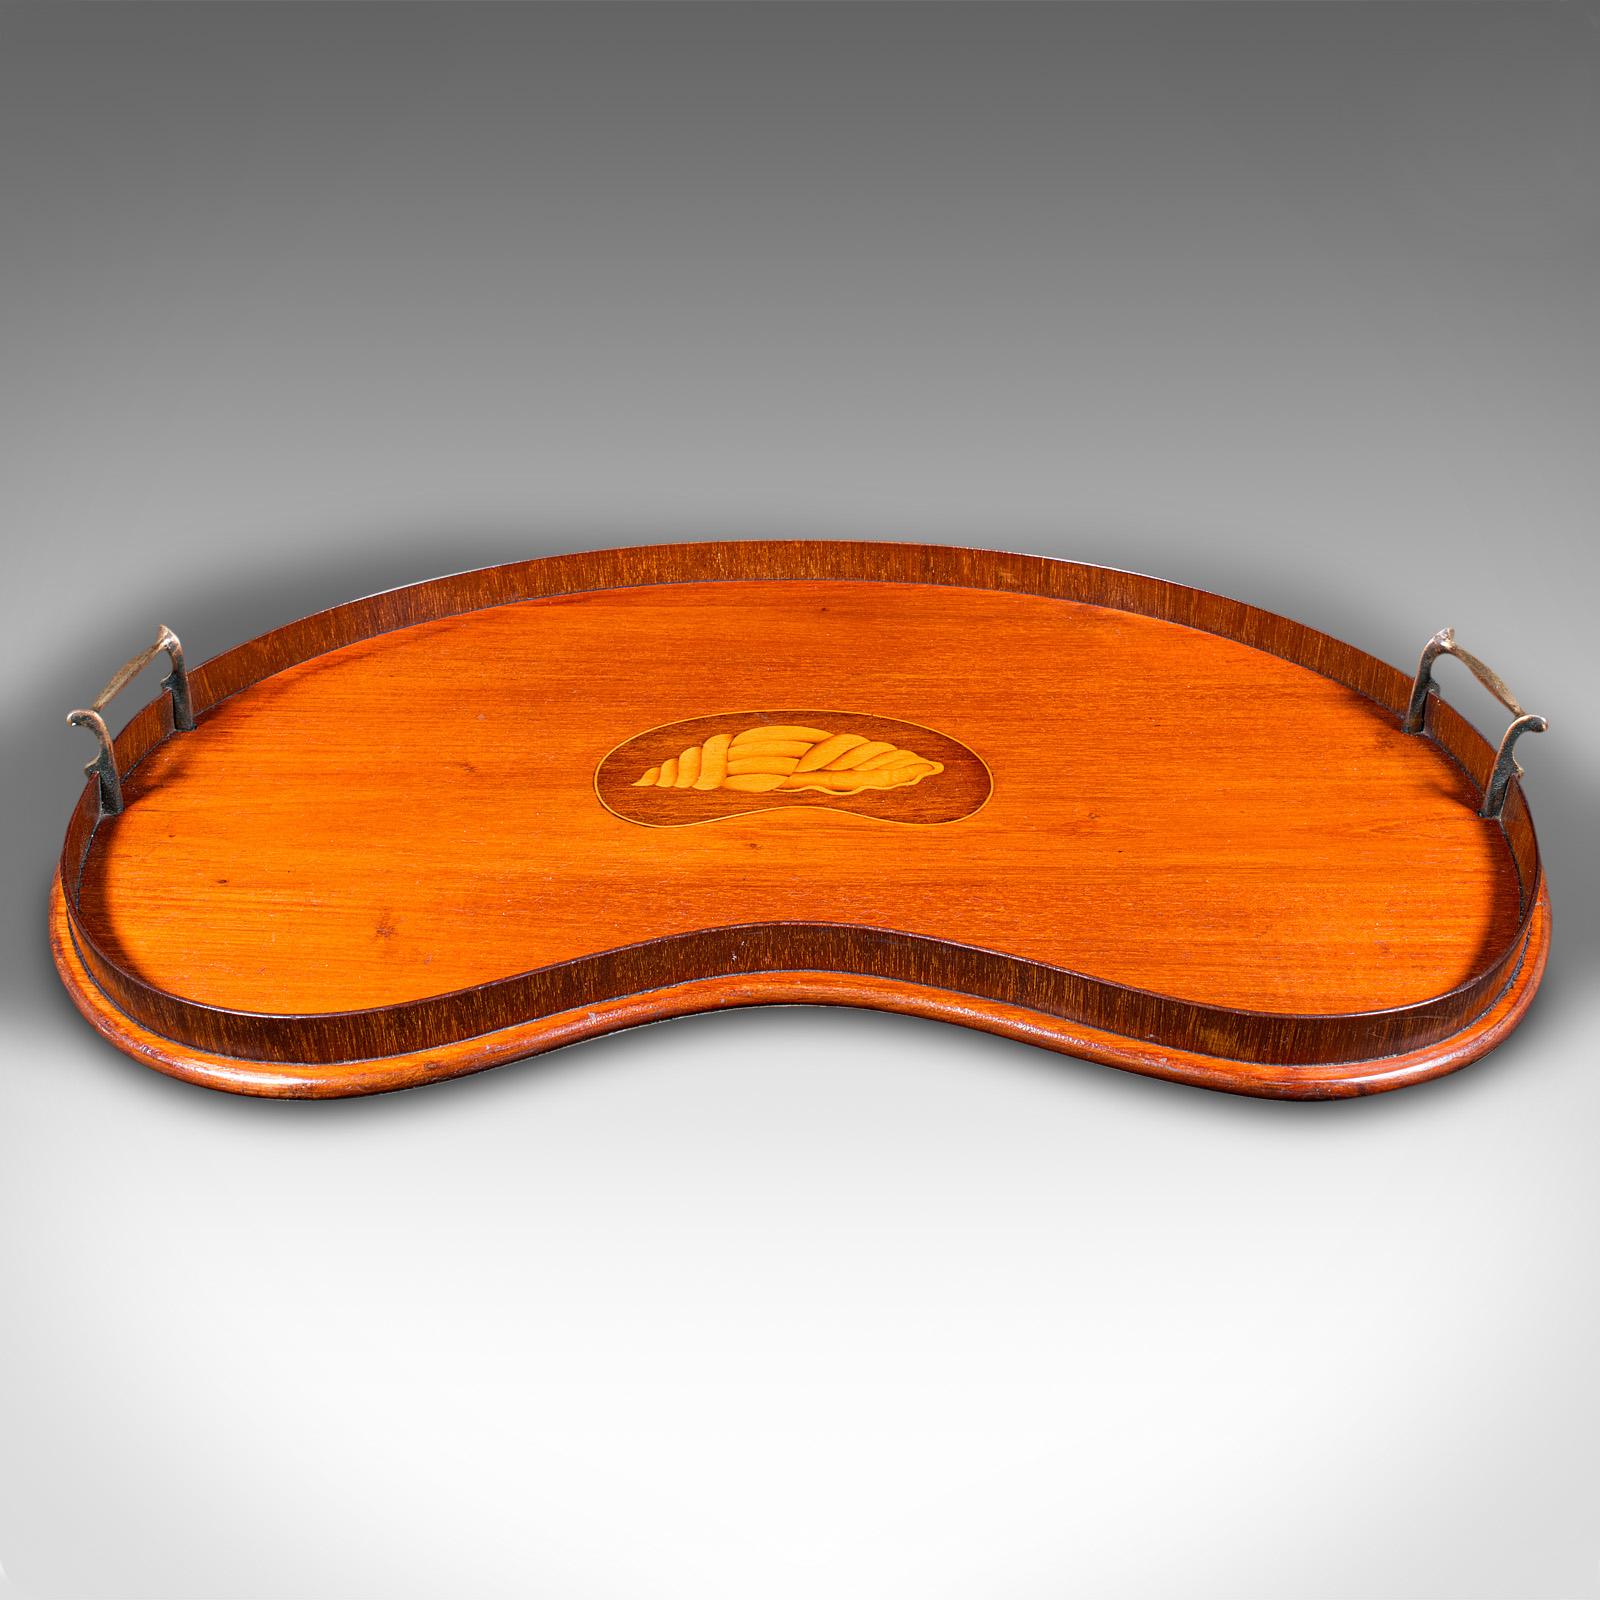 This is an antique decorative afternoon tea tray. An English, walnut and brass serving platter, dating to the Edwardian period, circa 1910.

Wonderful kidney shaped serving tray with great colour
Displays a desirable aged patina and in good order